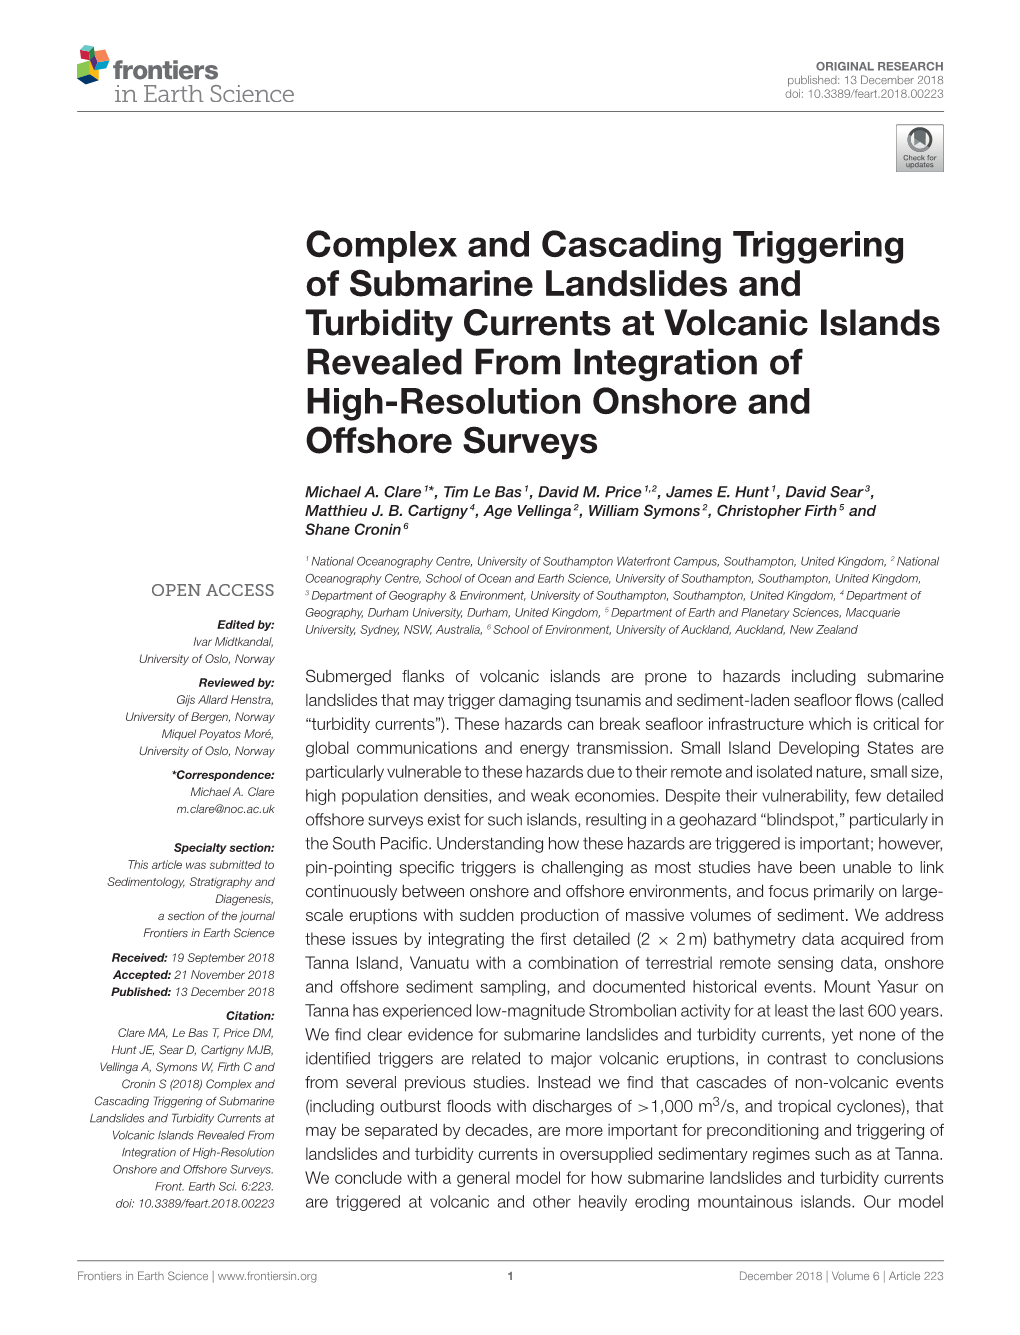 Complex and Cascading Triggering of Submarine Landslides And